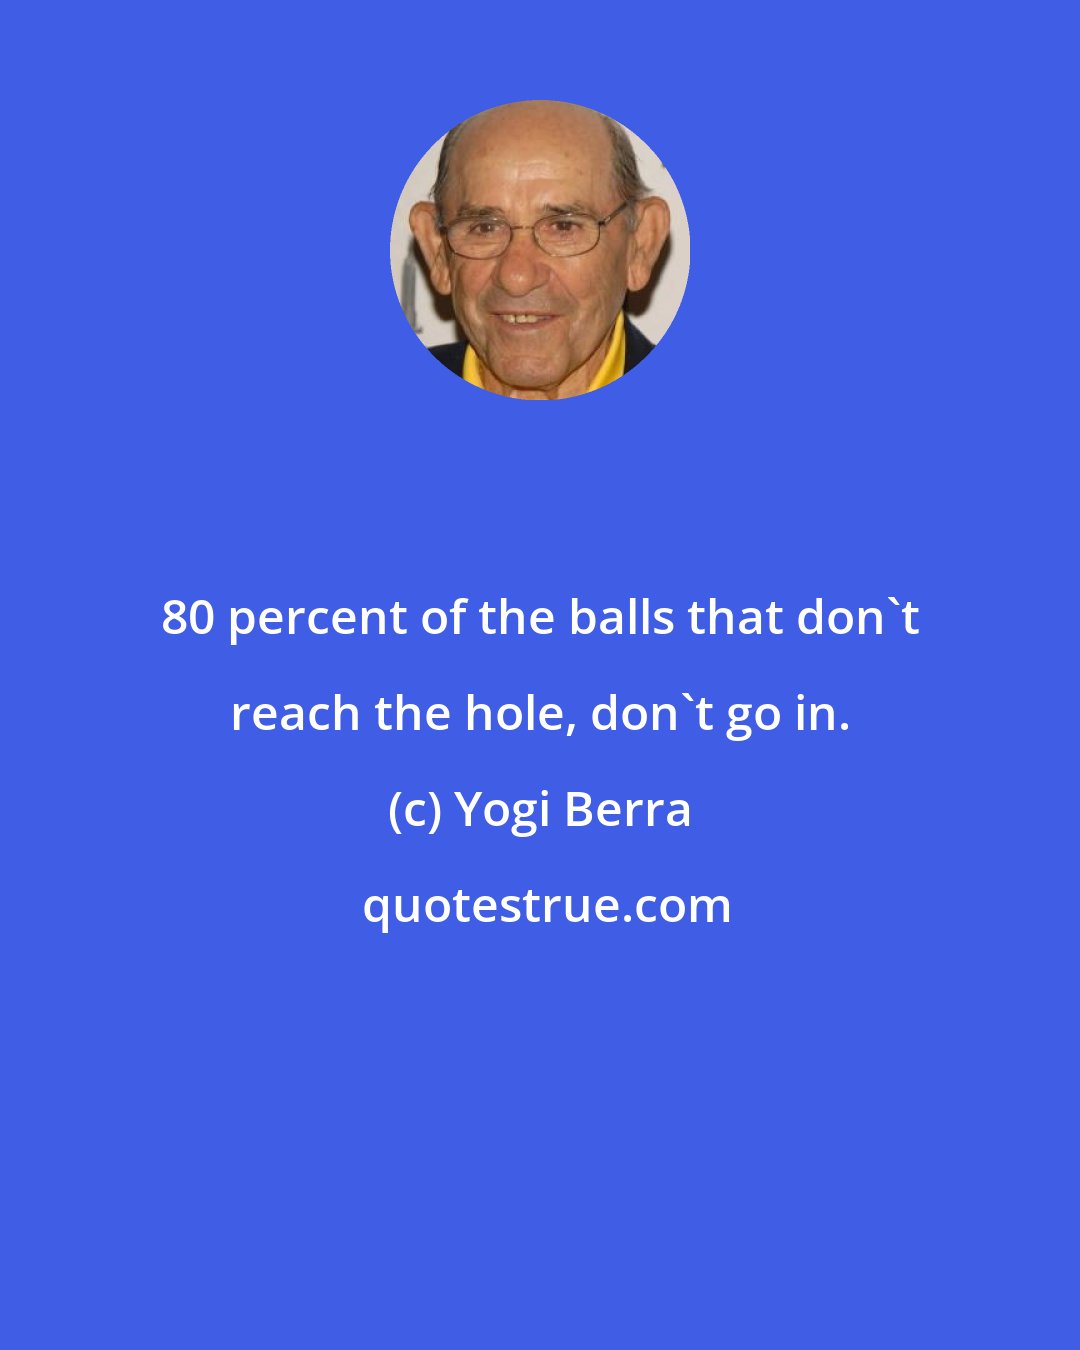 Yogi Berra: 80 percent of the balls that don't reach the hole, don't go in.